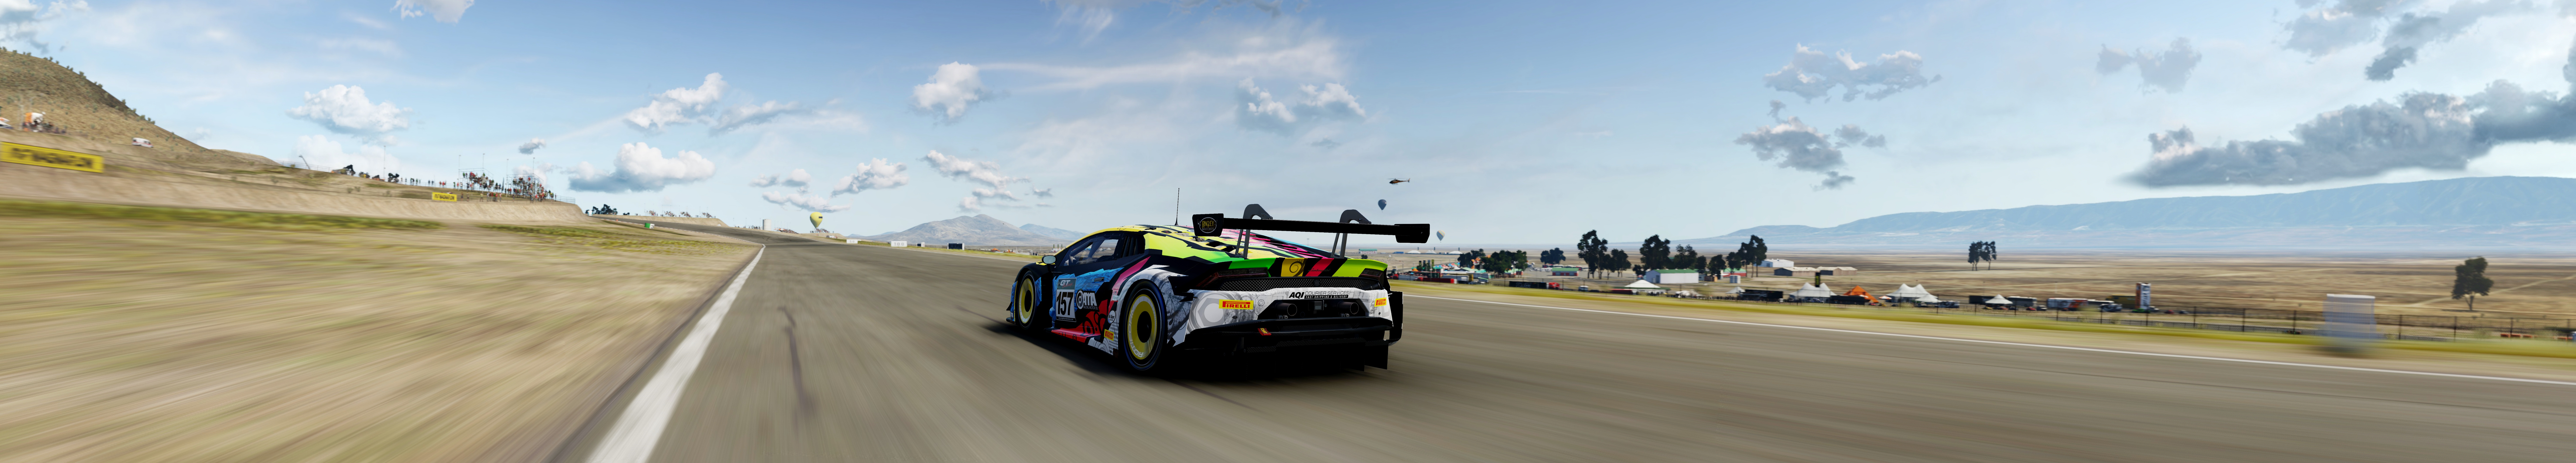 Steam Community :: Project CARS 3